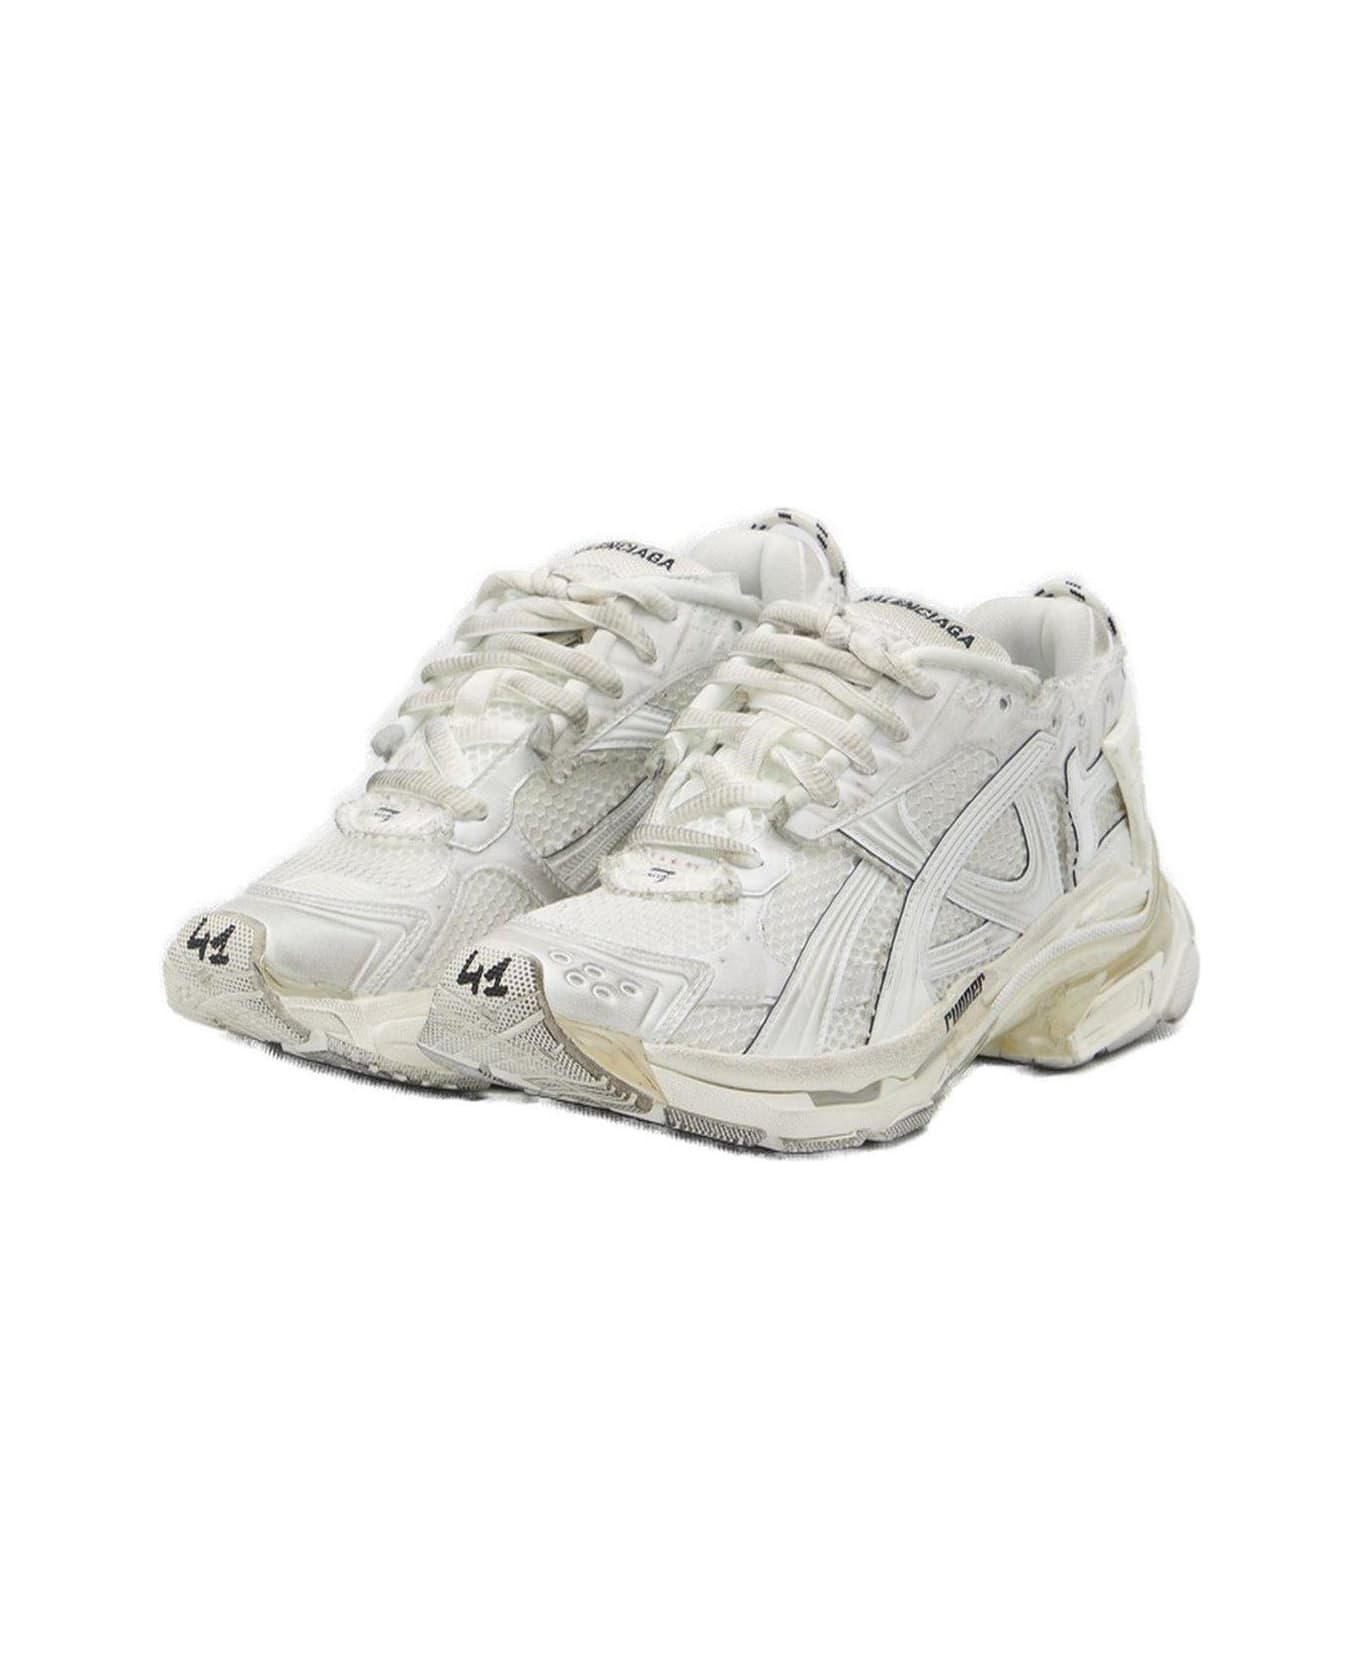 Balenciaga Runner Lace-up Sneakers - White